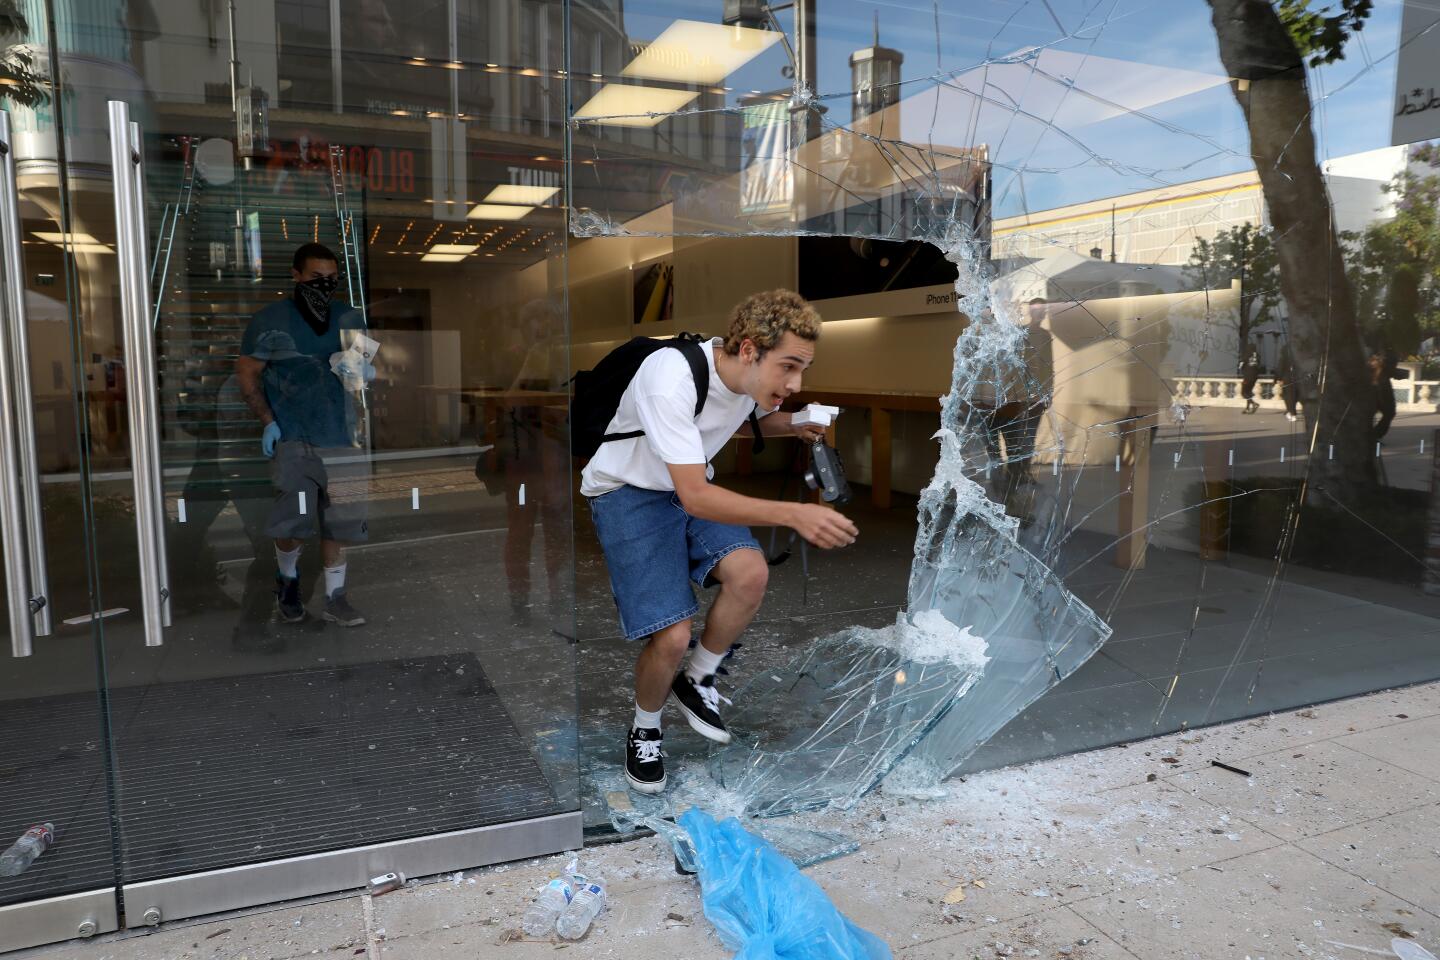 A man leaves the broken-into Apple Store with merchandise at the Grove in the Fairfax District in Los Angeles.